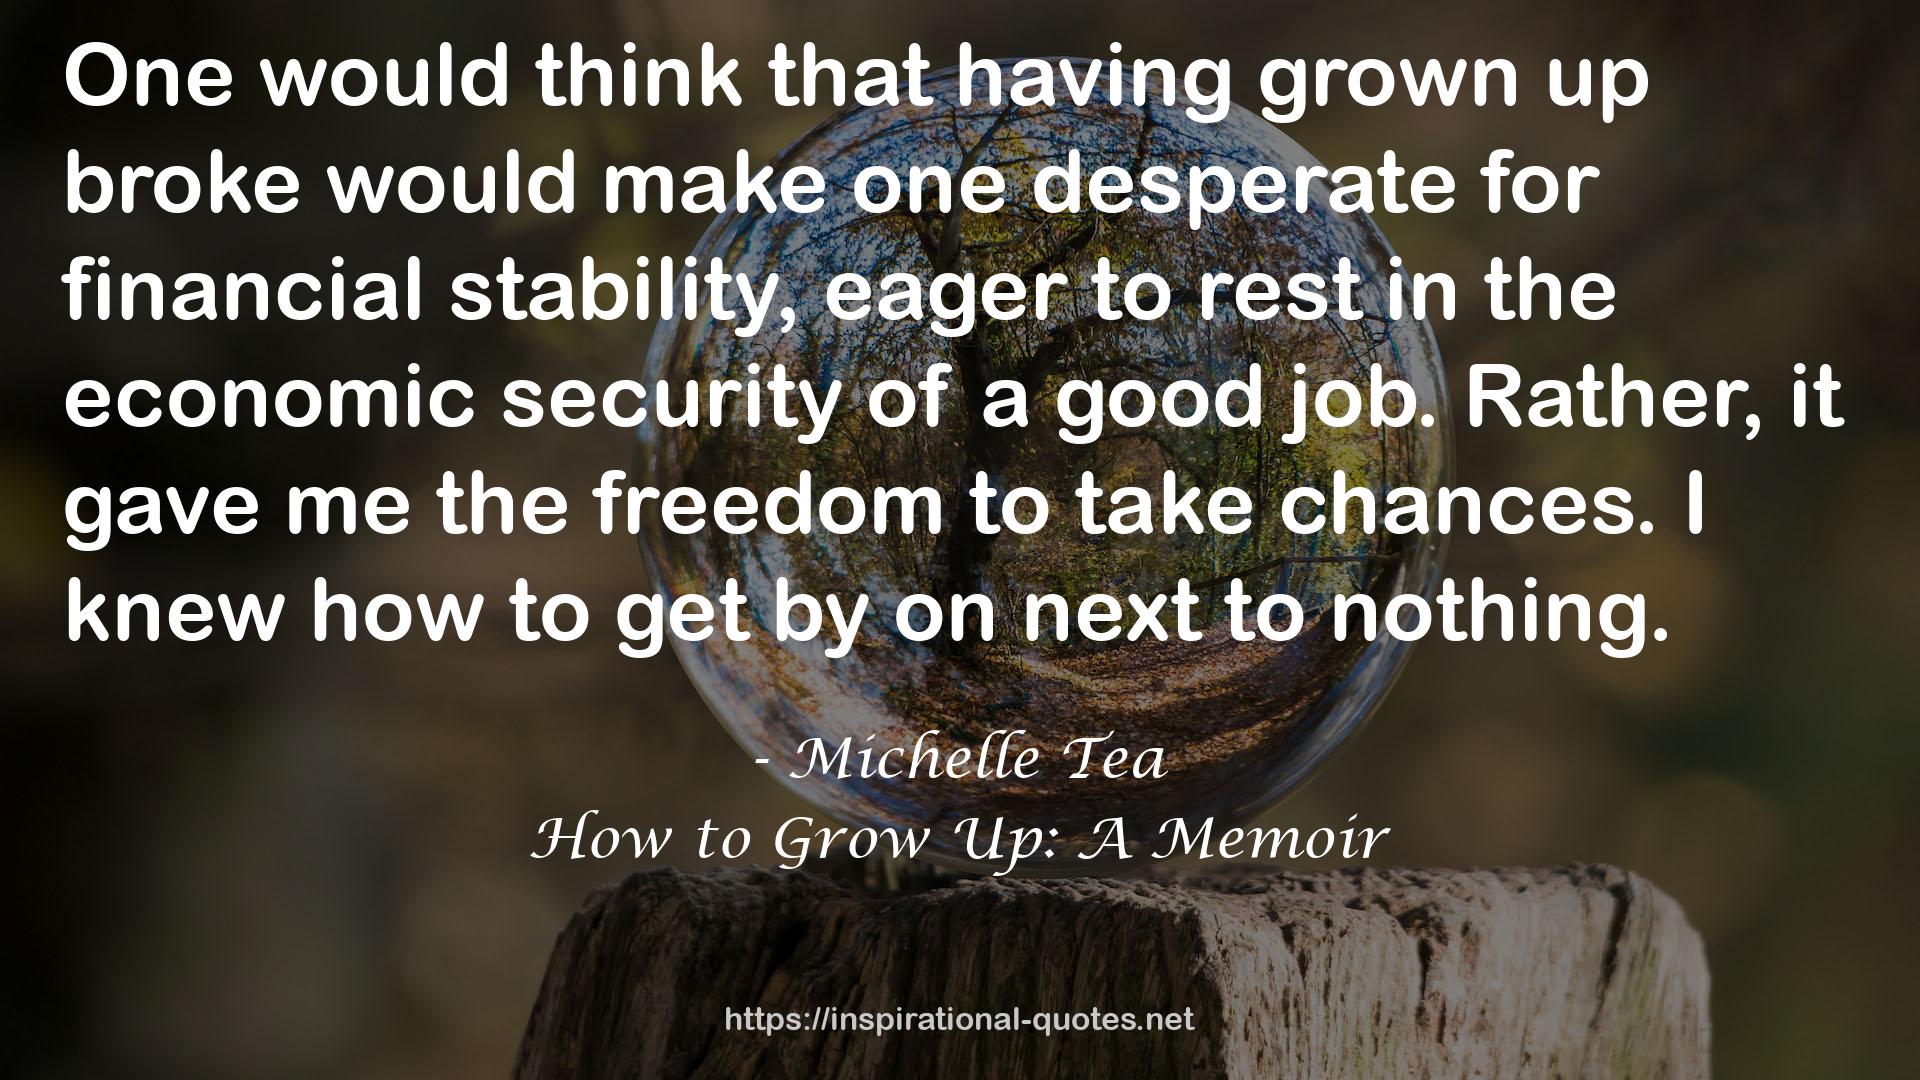 How to Grow Up: A Memoir QUOTES